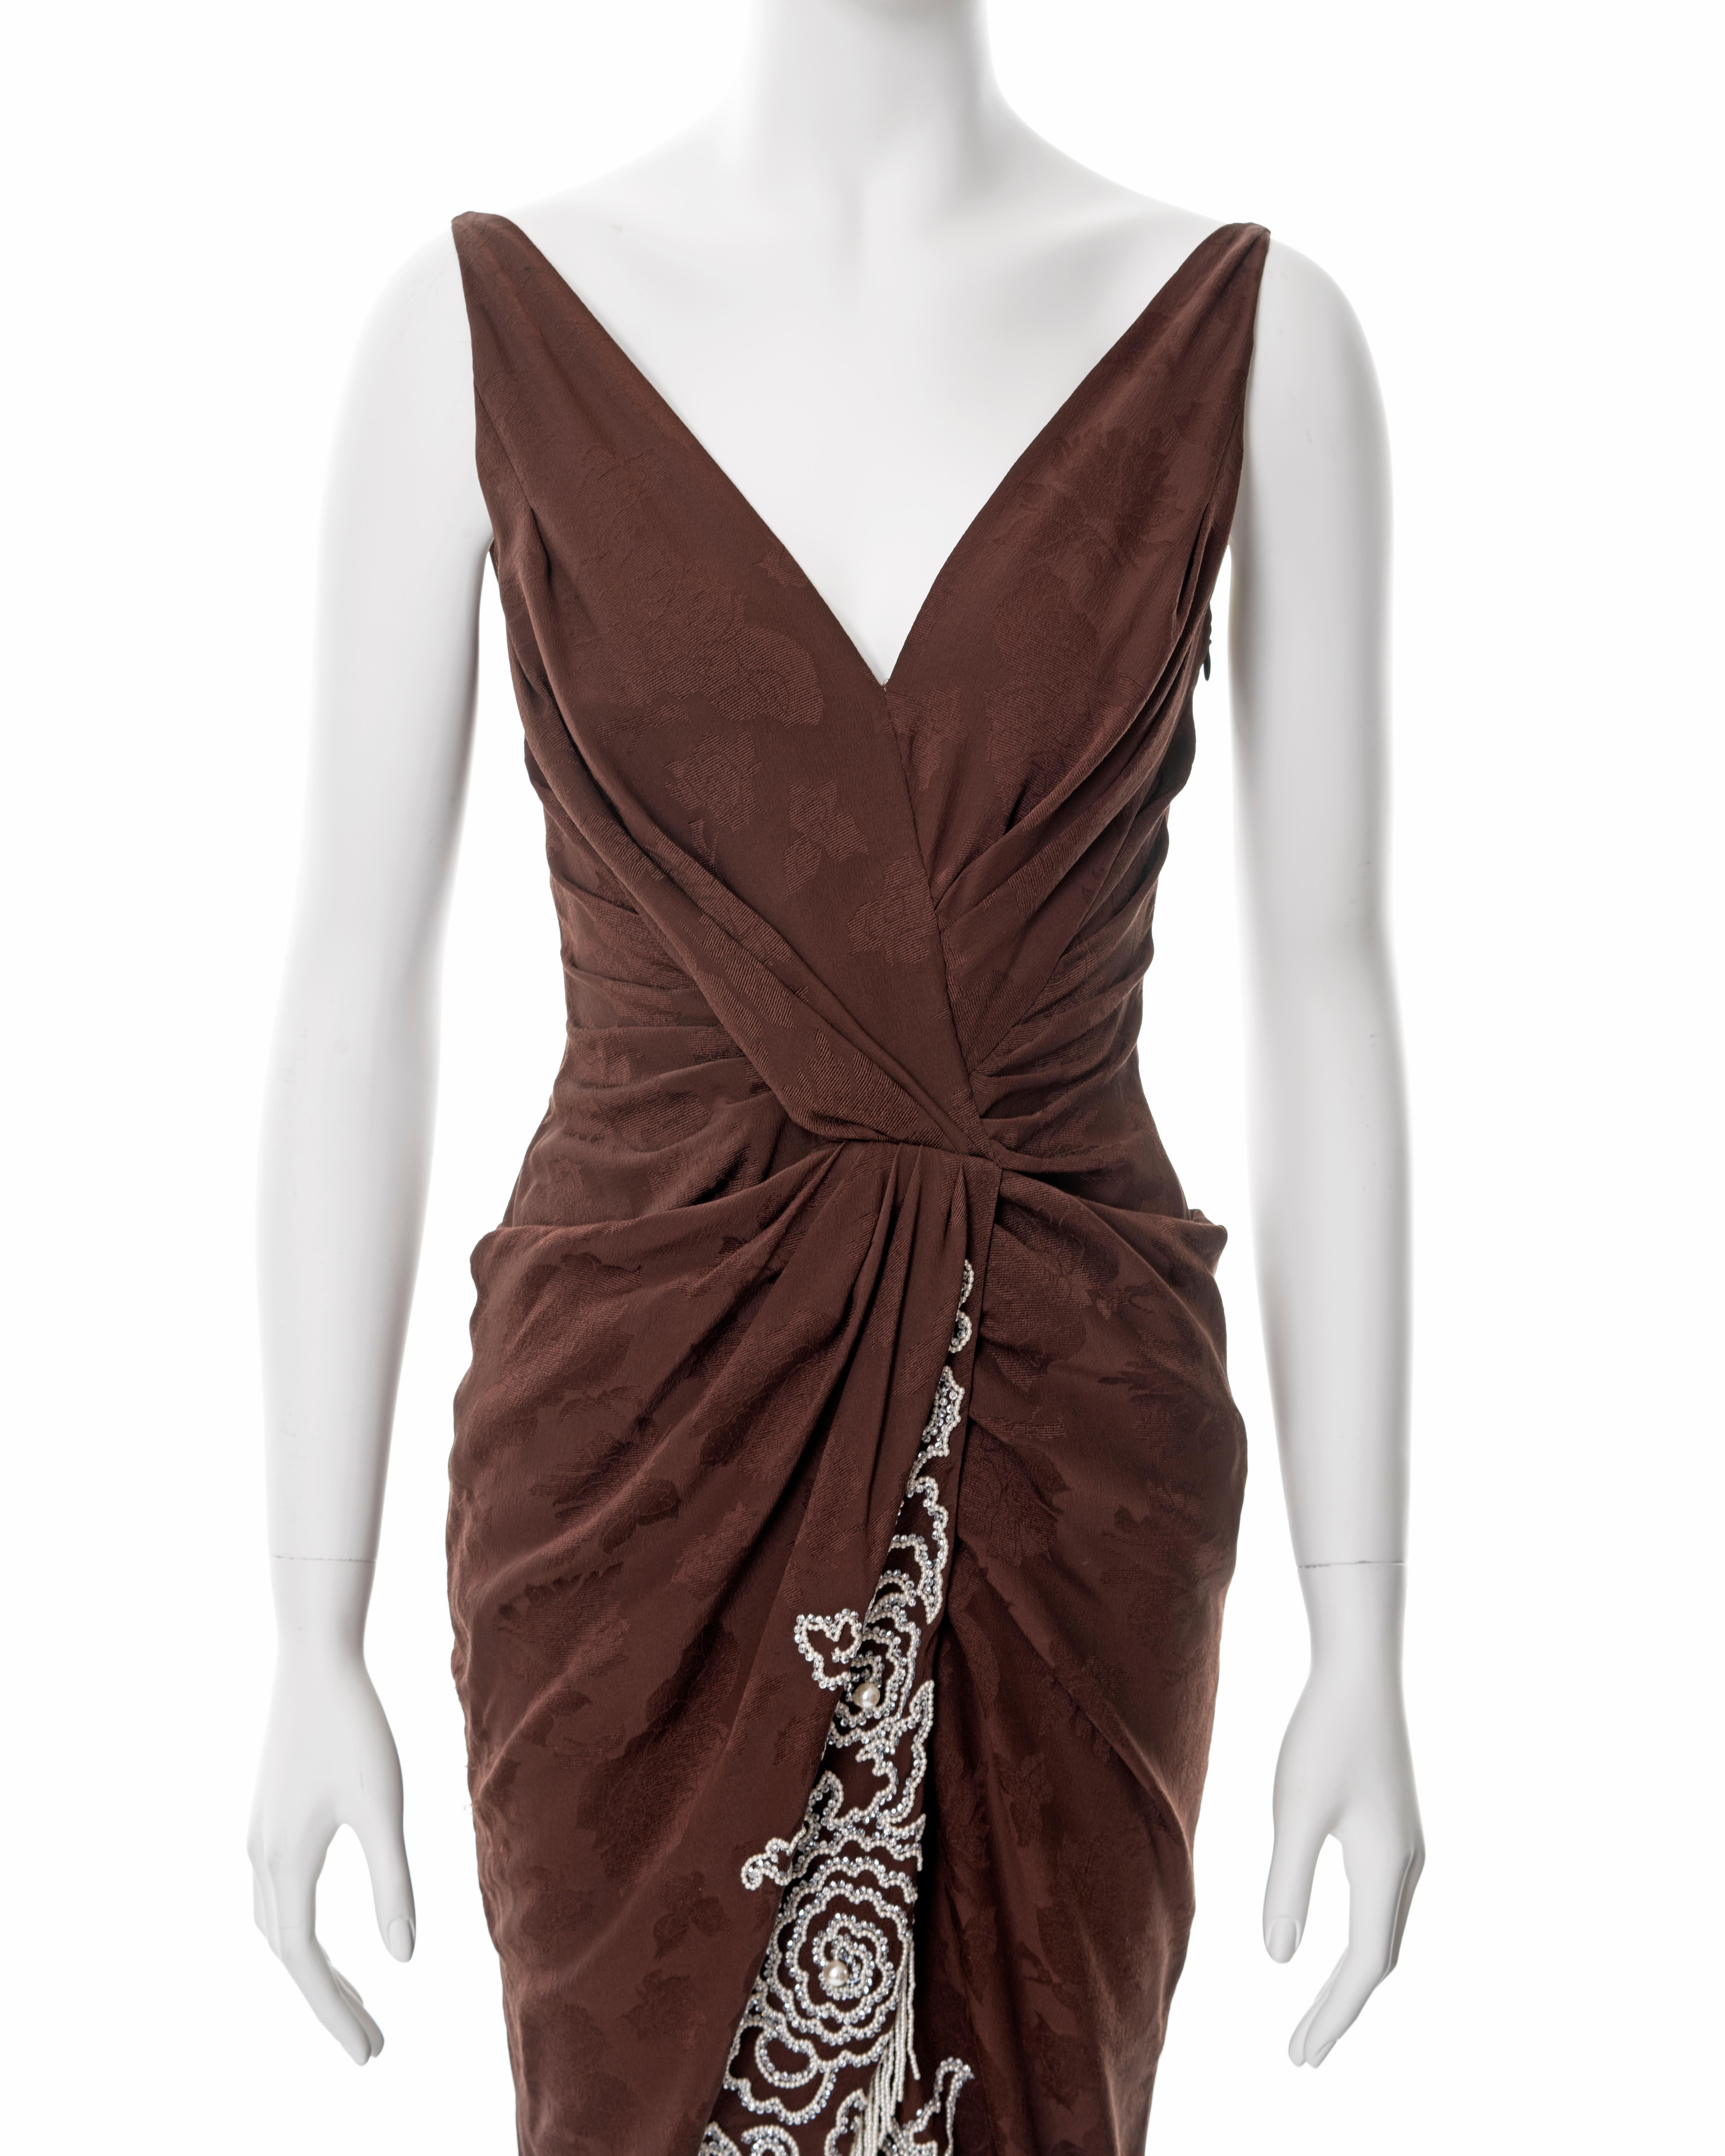 Christian Dior by John Galliano pearl beaded brown silk cocktail dress, ss 2008 In Excellent Condition For Sale In London, GB